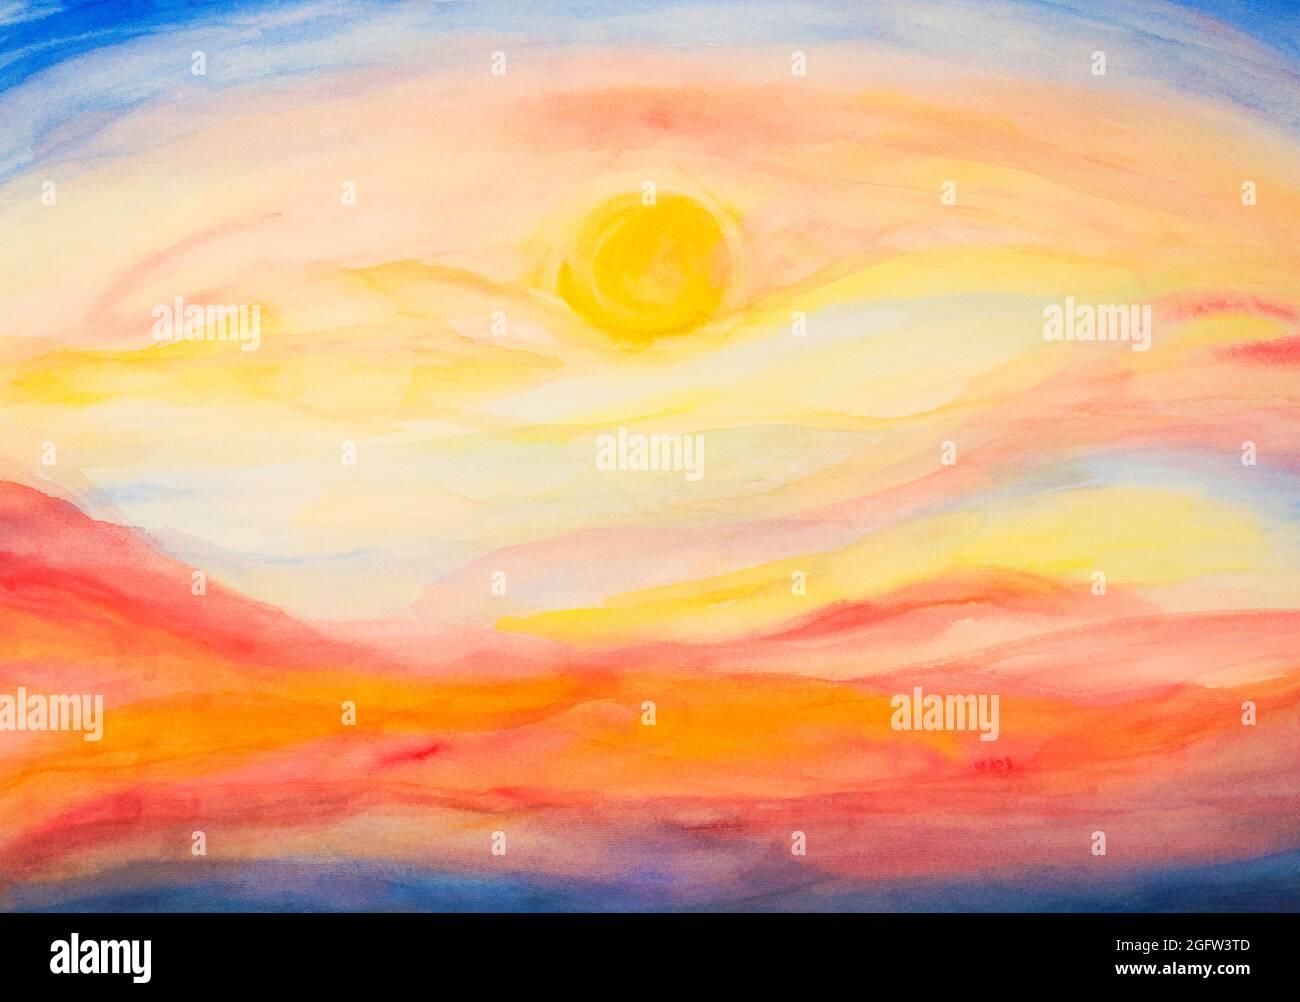 Bright Colorful Abstract Sunset Or Sunrise Sky Wallpaper